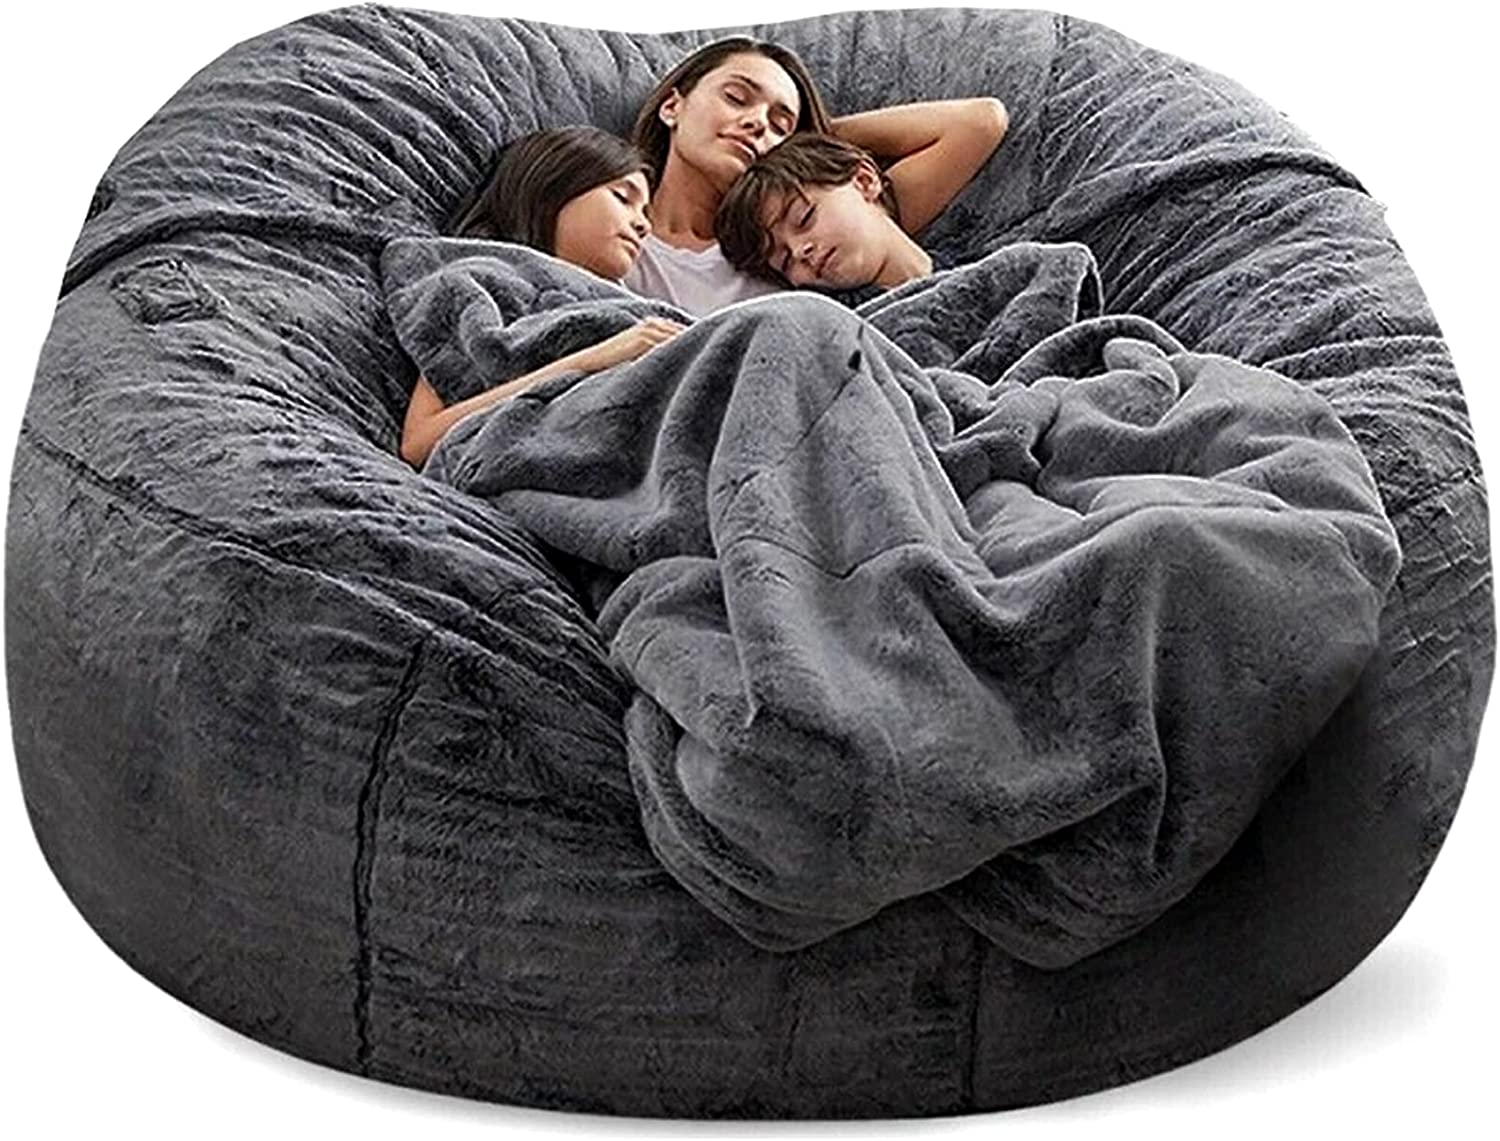 Enasui Bean Bag Chairs, 7ft Giant Bean Bag Chair for Adults, Big Bean Bag  Cover Comfy Large Bean Bag Bed (No Filler, Cover only) Fluffy Lazy Sofa